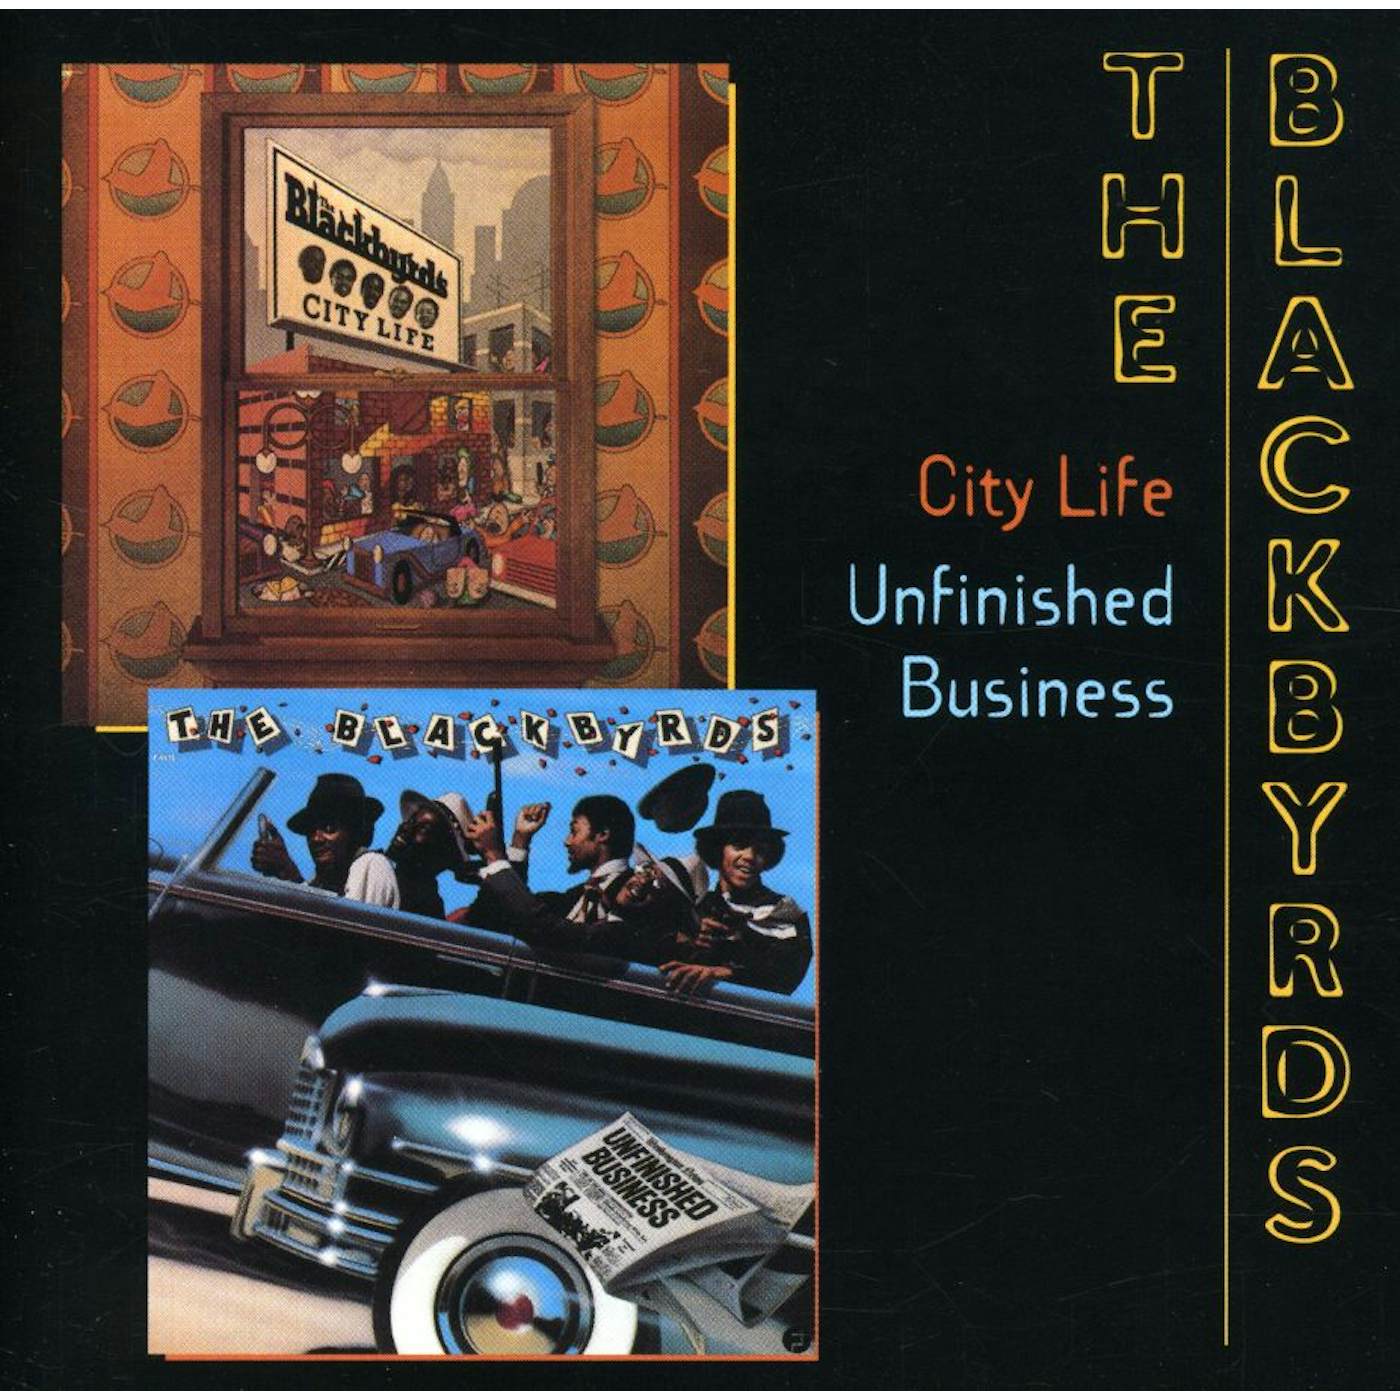 The Blackbyrds CITY LIFE / UNFINISHED BUSINESS CD